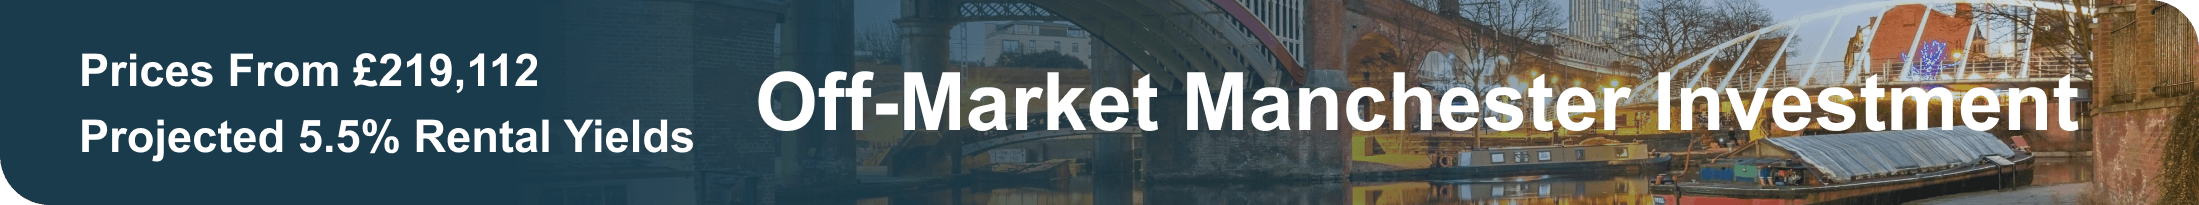 Off-Market Manchester Investment